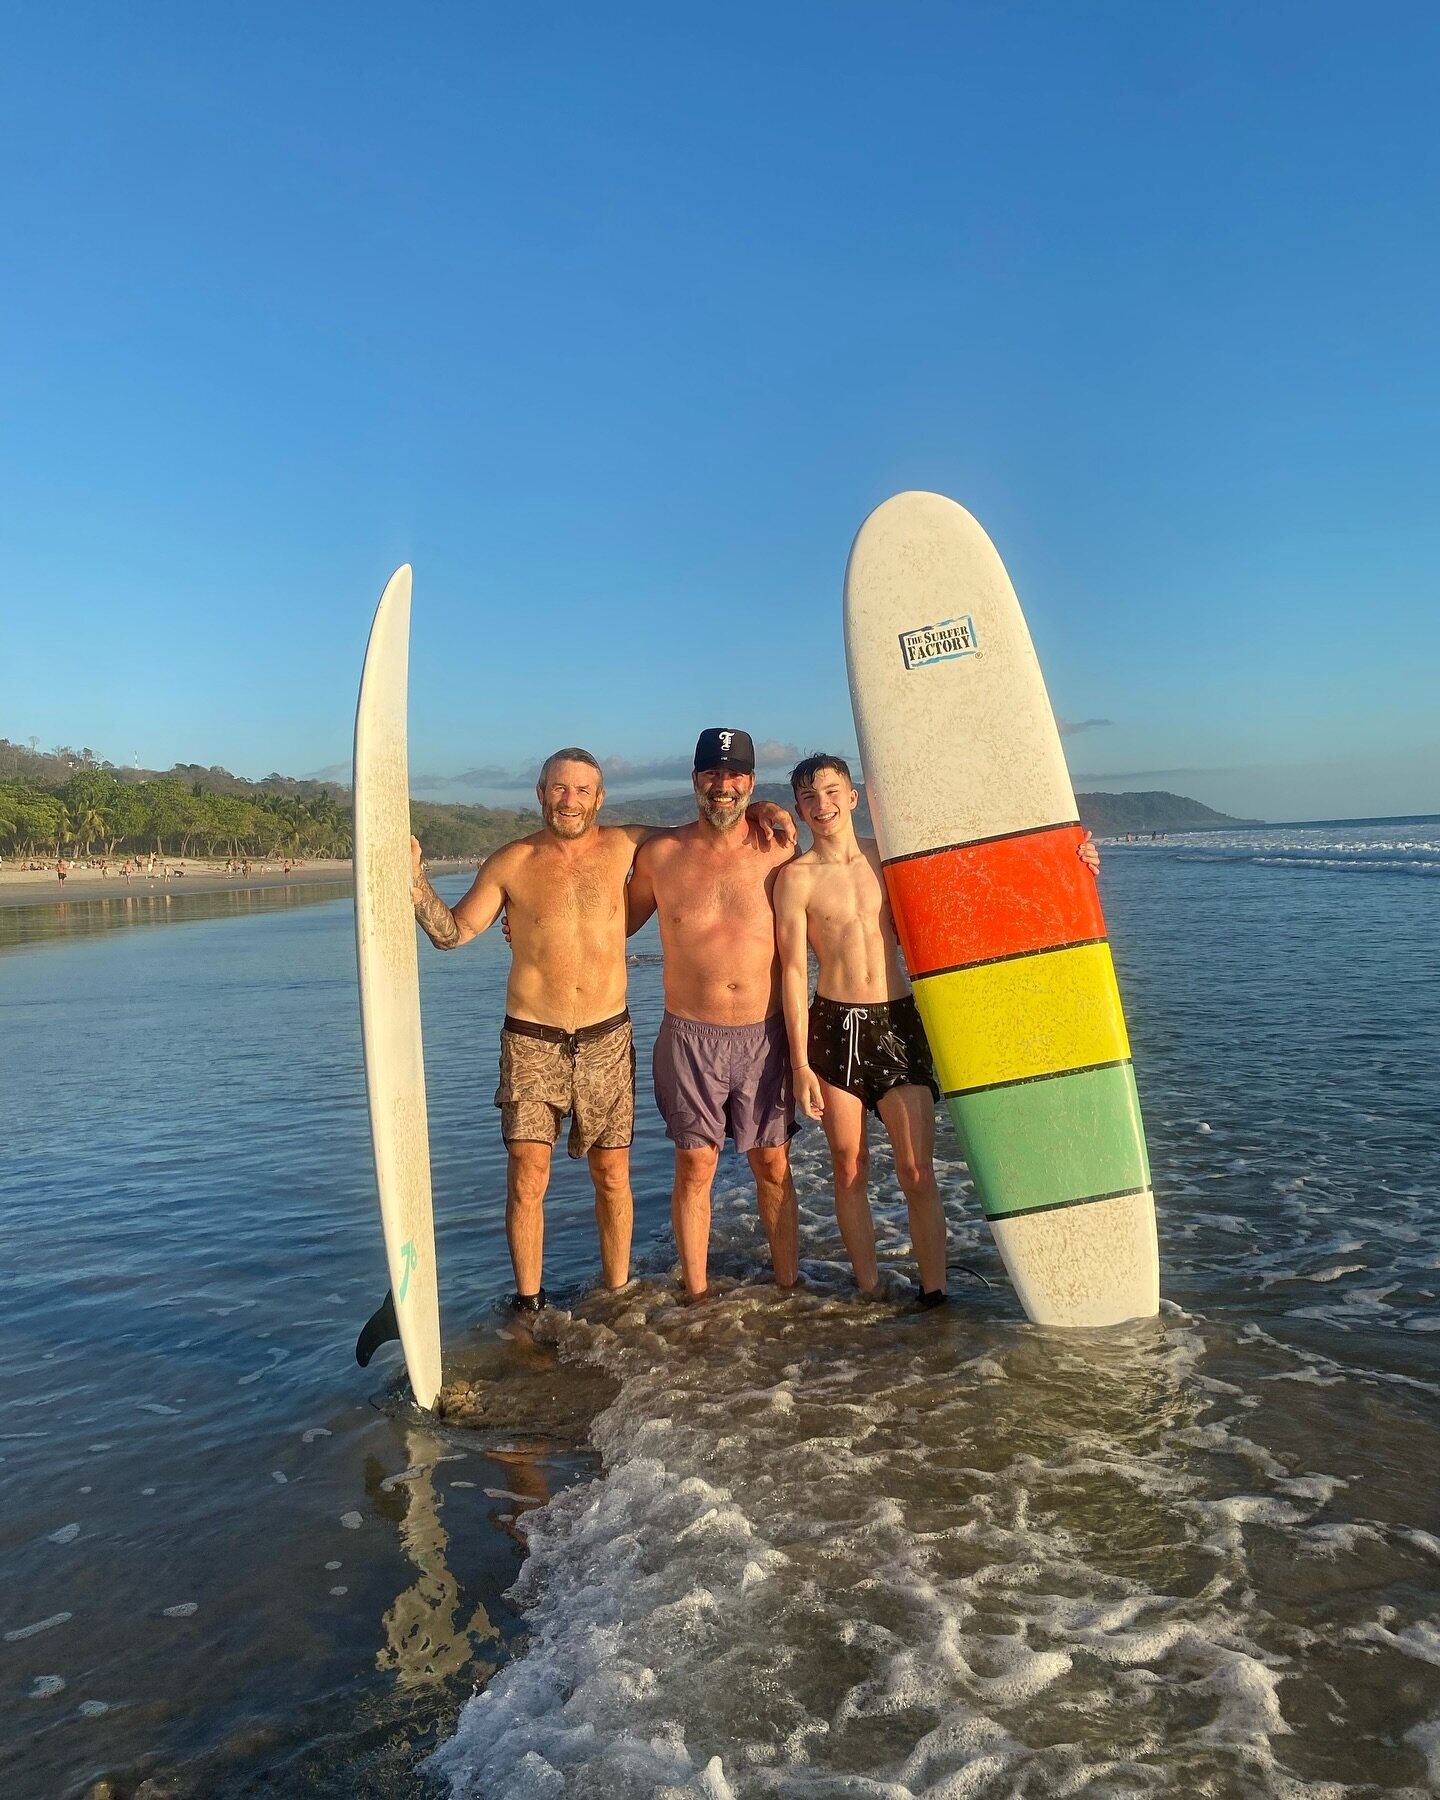 How a craigslist ad for a rental in Costa Rica turned into a 22-year friendship.🌴

I was looking to take a trip to Costa Rica, and this was way before AirBnB and VRBO.&nbsp;

Back then, finding a rental property was challenging at best.

I eventuall